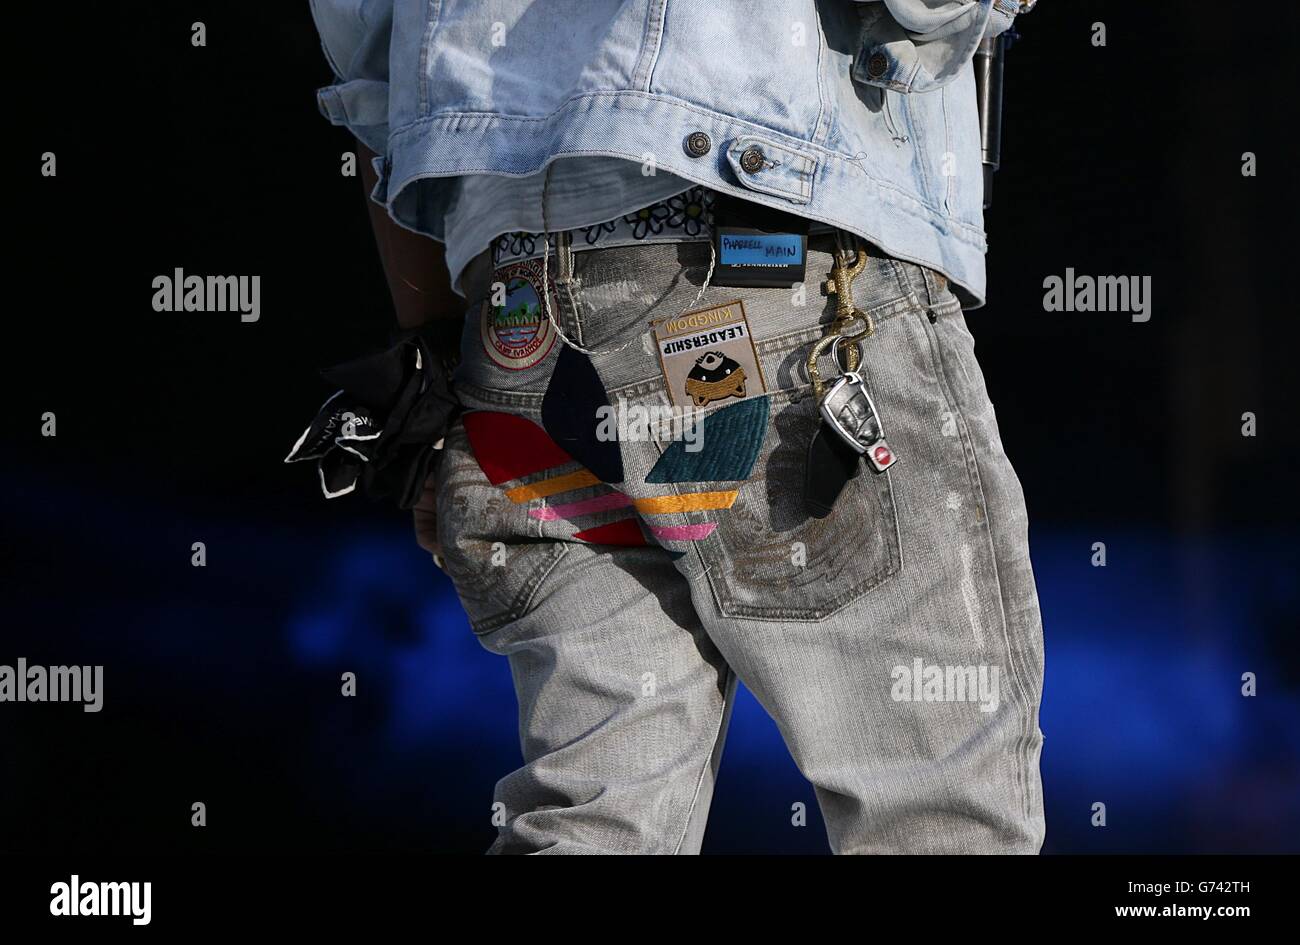 Adidas detail on the seat of Pharrell Williams' jeans during Capital FM's  Summertime Ball at Wembley Stadium, London Stock Photo - Alamy